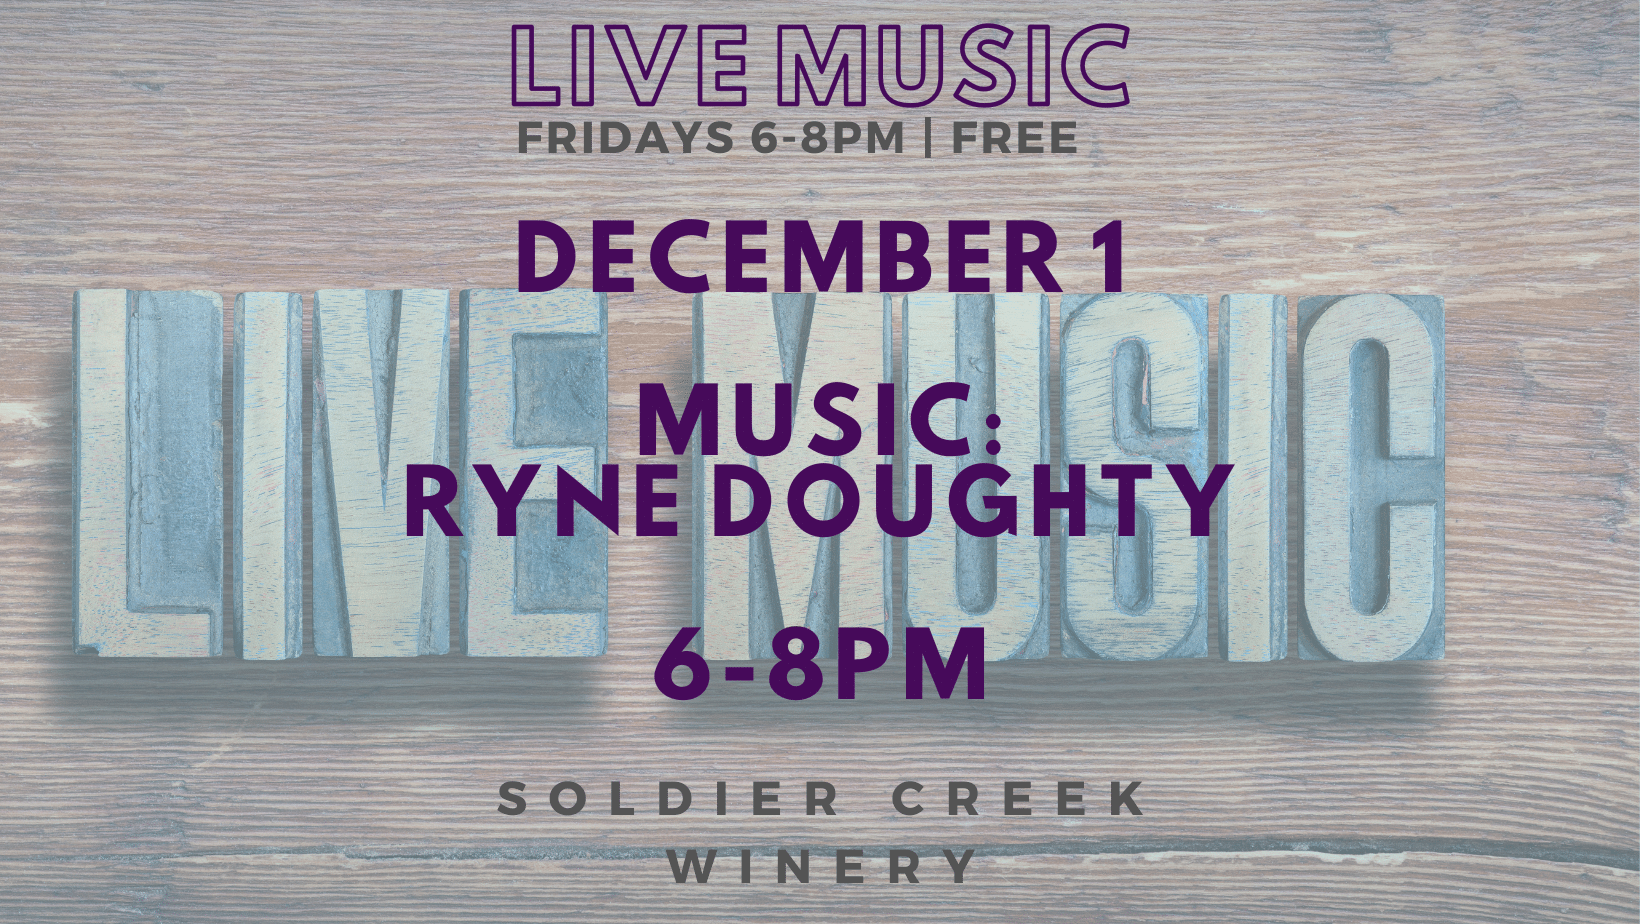 vineyard vibrations at soldier creek winery on friday, dec 1 from 6-8pm featuring ryne doughty. free to listen!